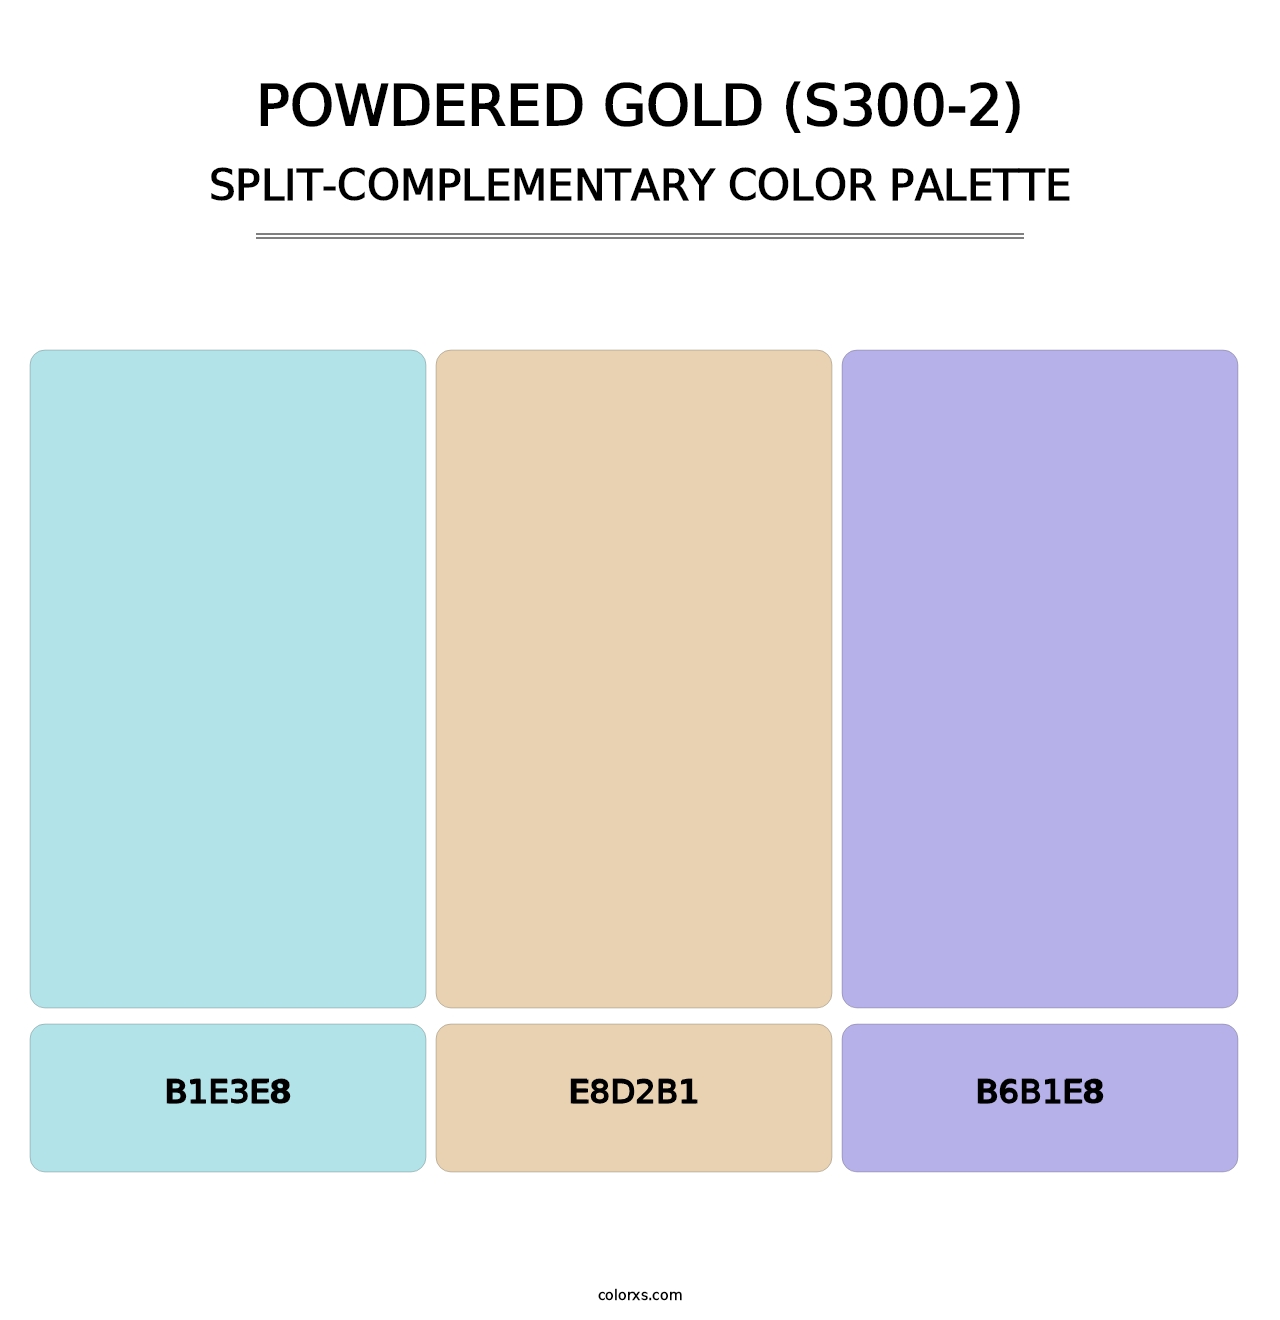 Powdered Gold (S300-2) - Split-Complementary Color Palette